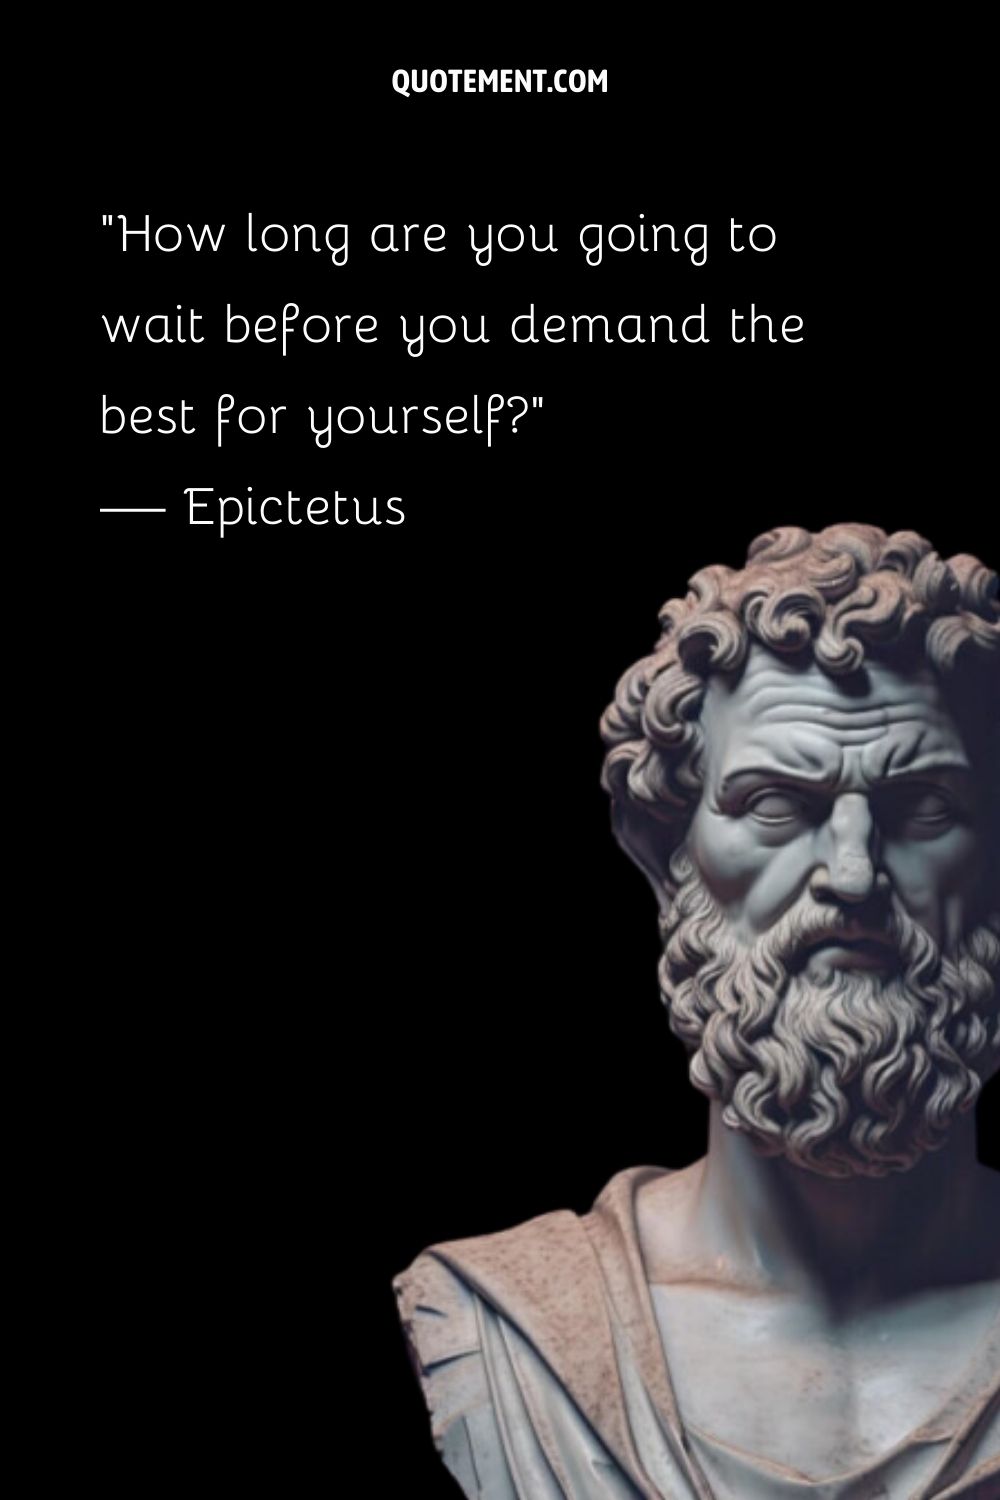 Epictetus' stoic strength whispers through sculpted marble art.